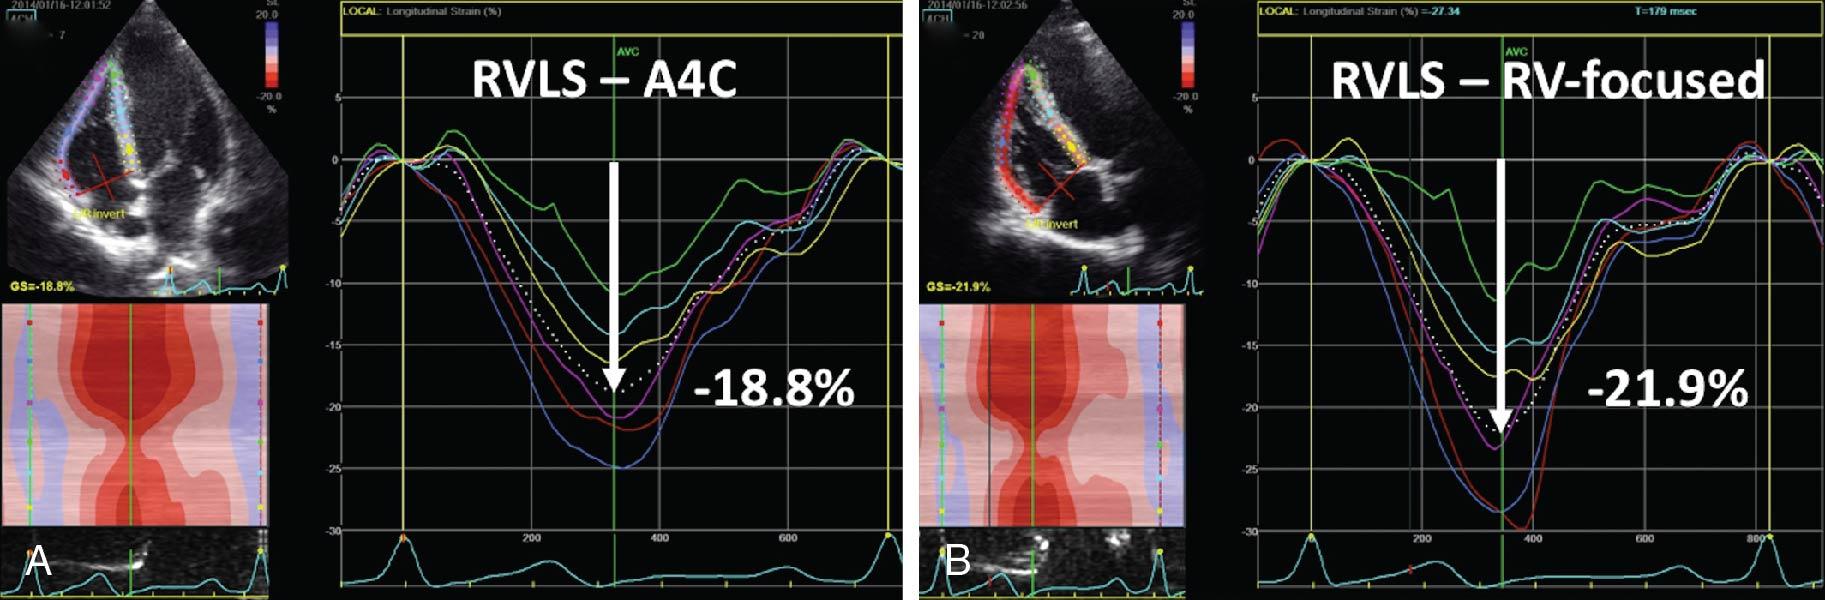 Fig. 9.5, Comparison of right ventricular (RV) four-chamber longitudinal strain obtained from a conventional apical four-chamber view (A4C; A ) and a RV focused four-chamber view ( B ) in the same patient. The RV-focused four-chamber view displays the whole free wall of the right ventricle and provides higher values of strain.